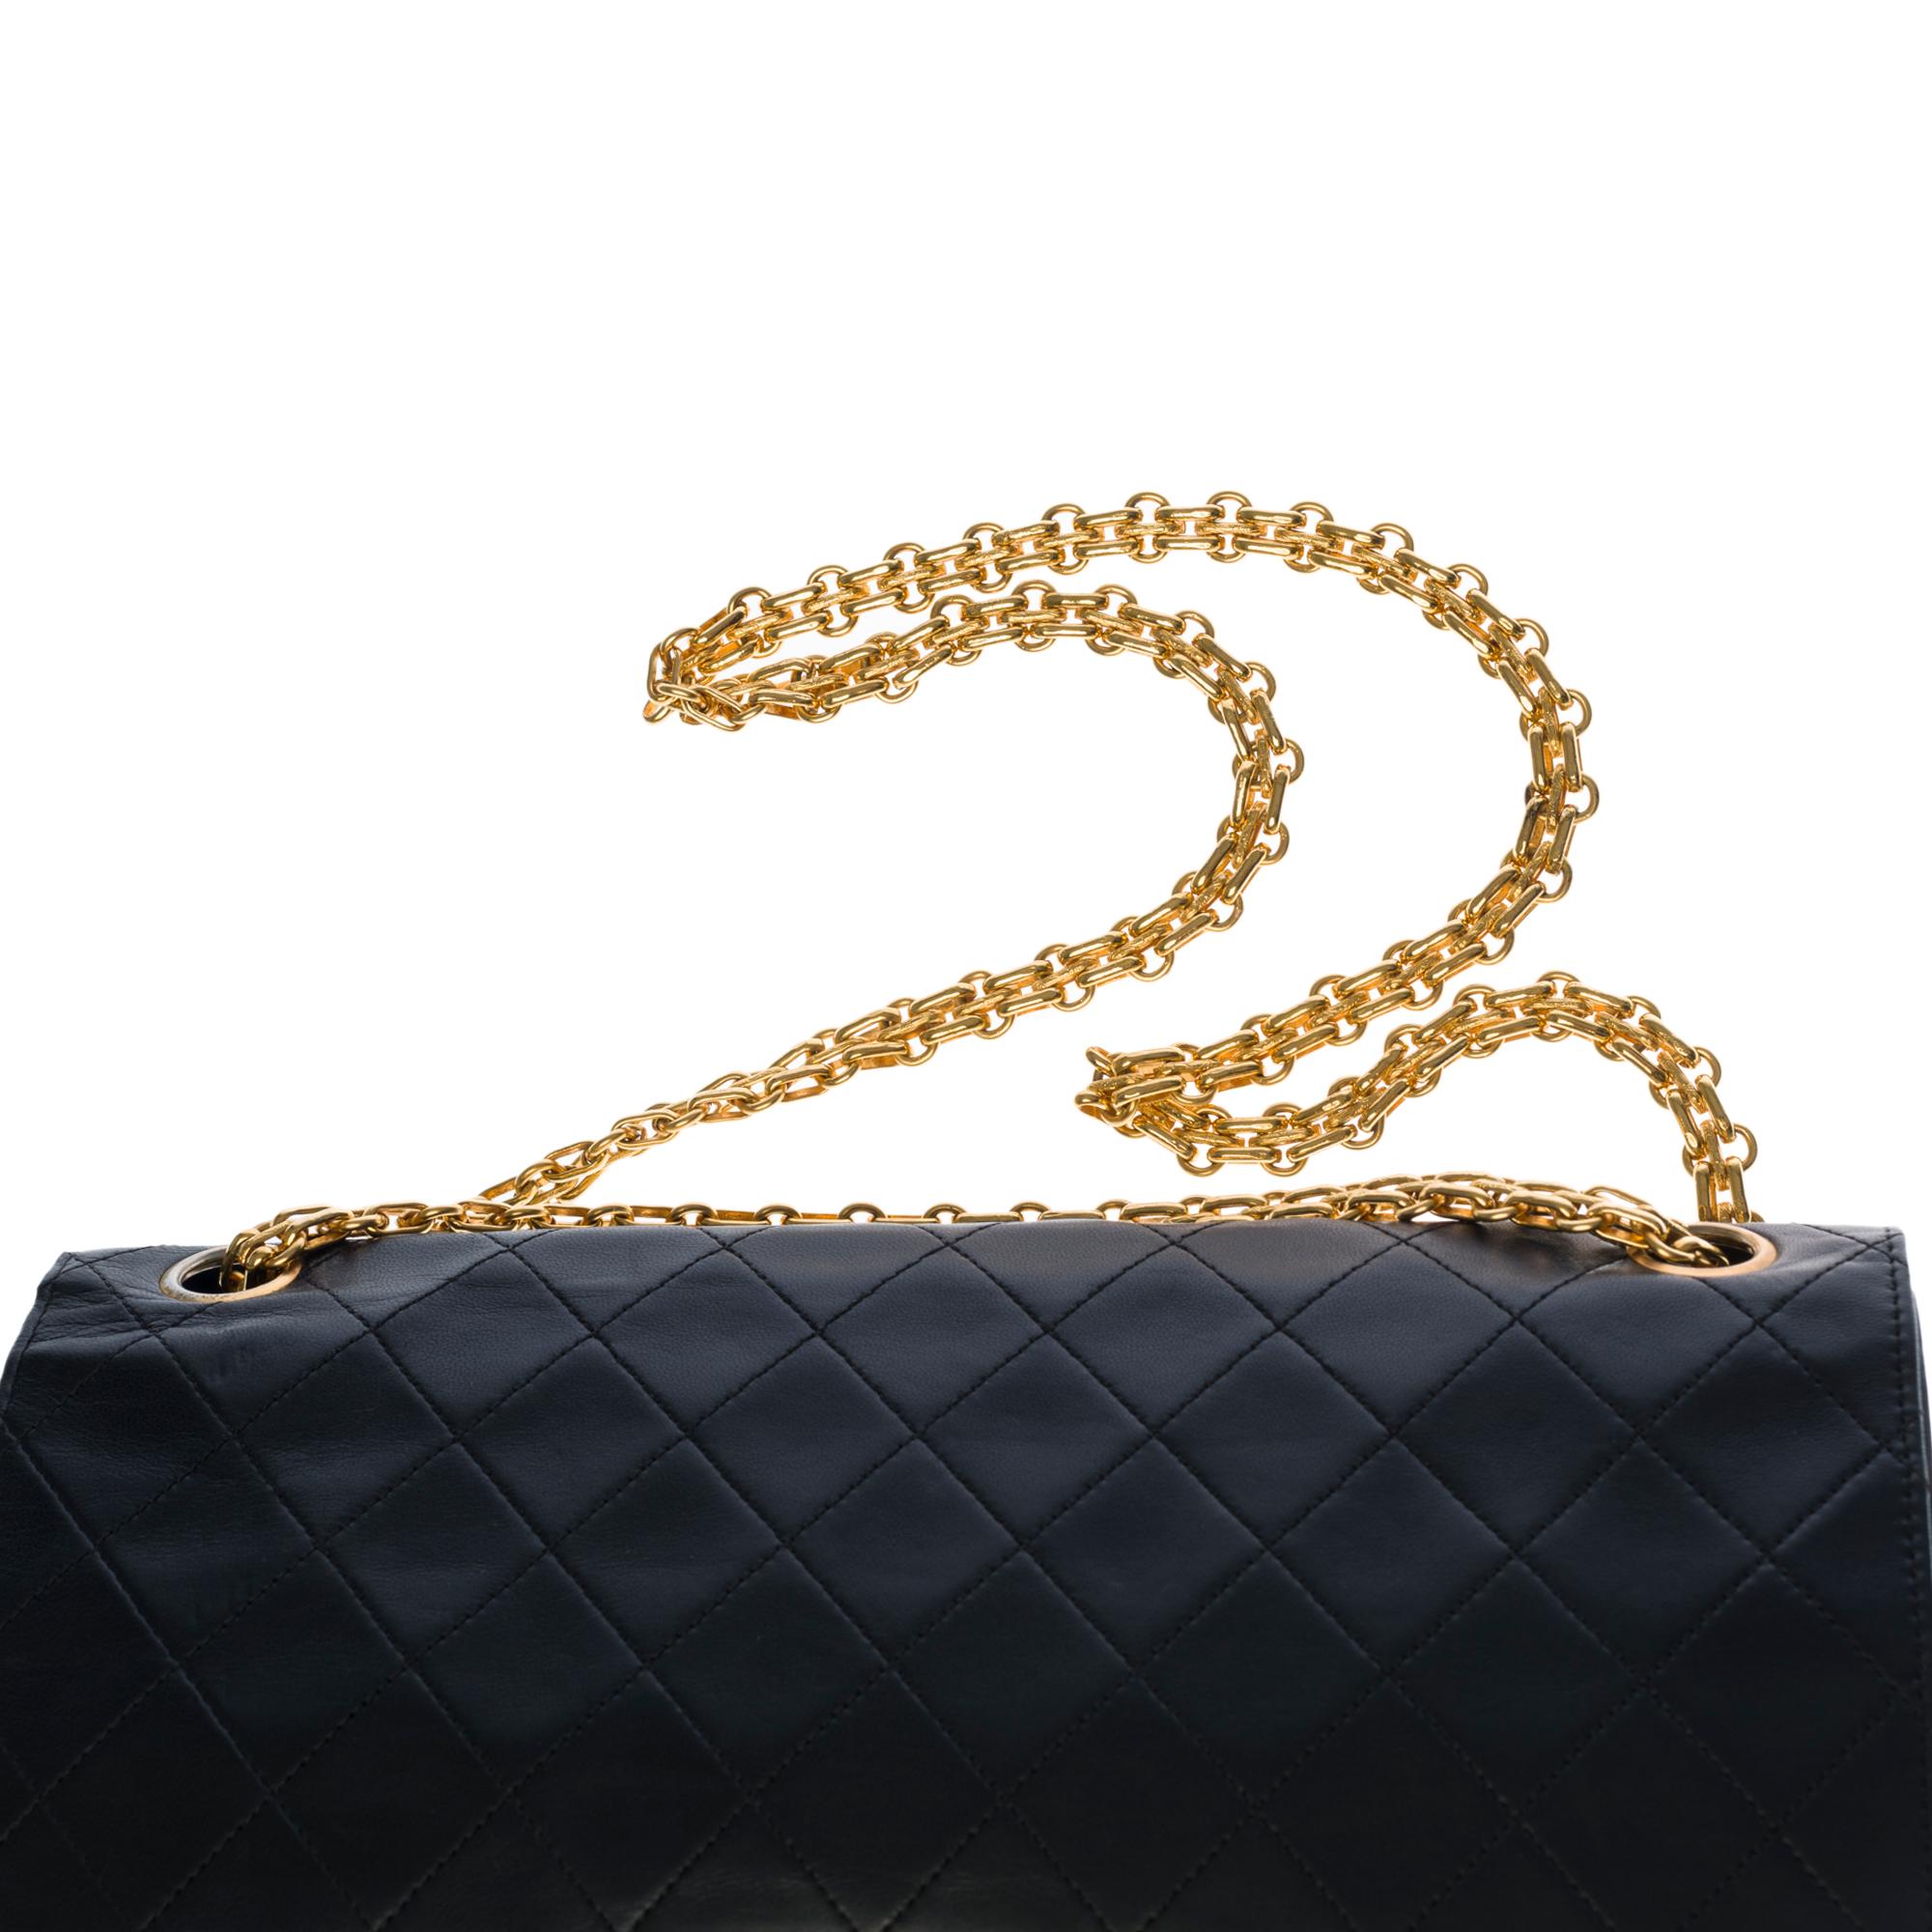 Chanel Timeless/Classic double Flap shoulder bag in black quilted lambskin, GHW 2